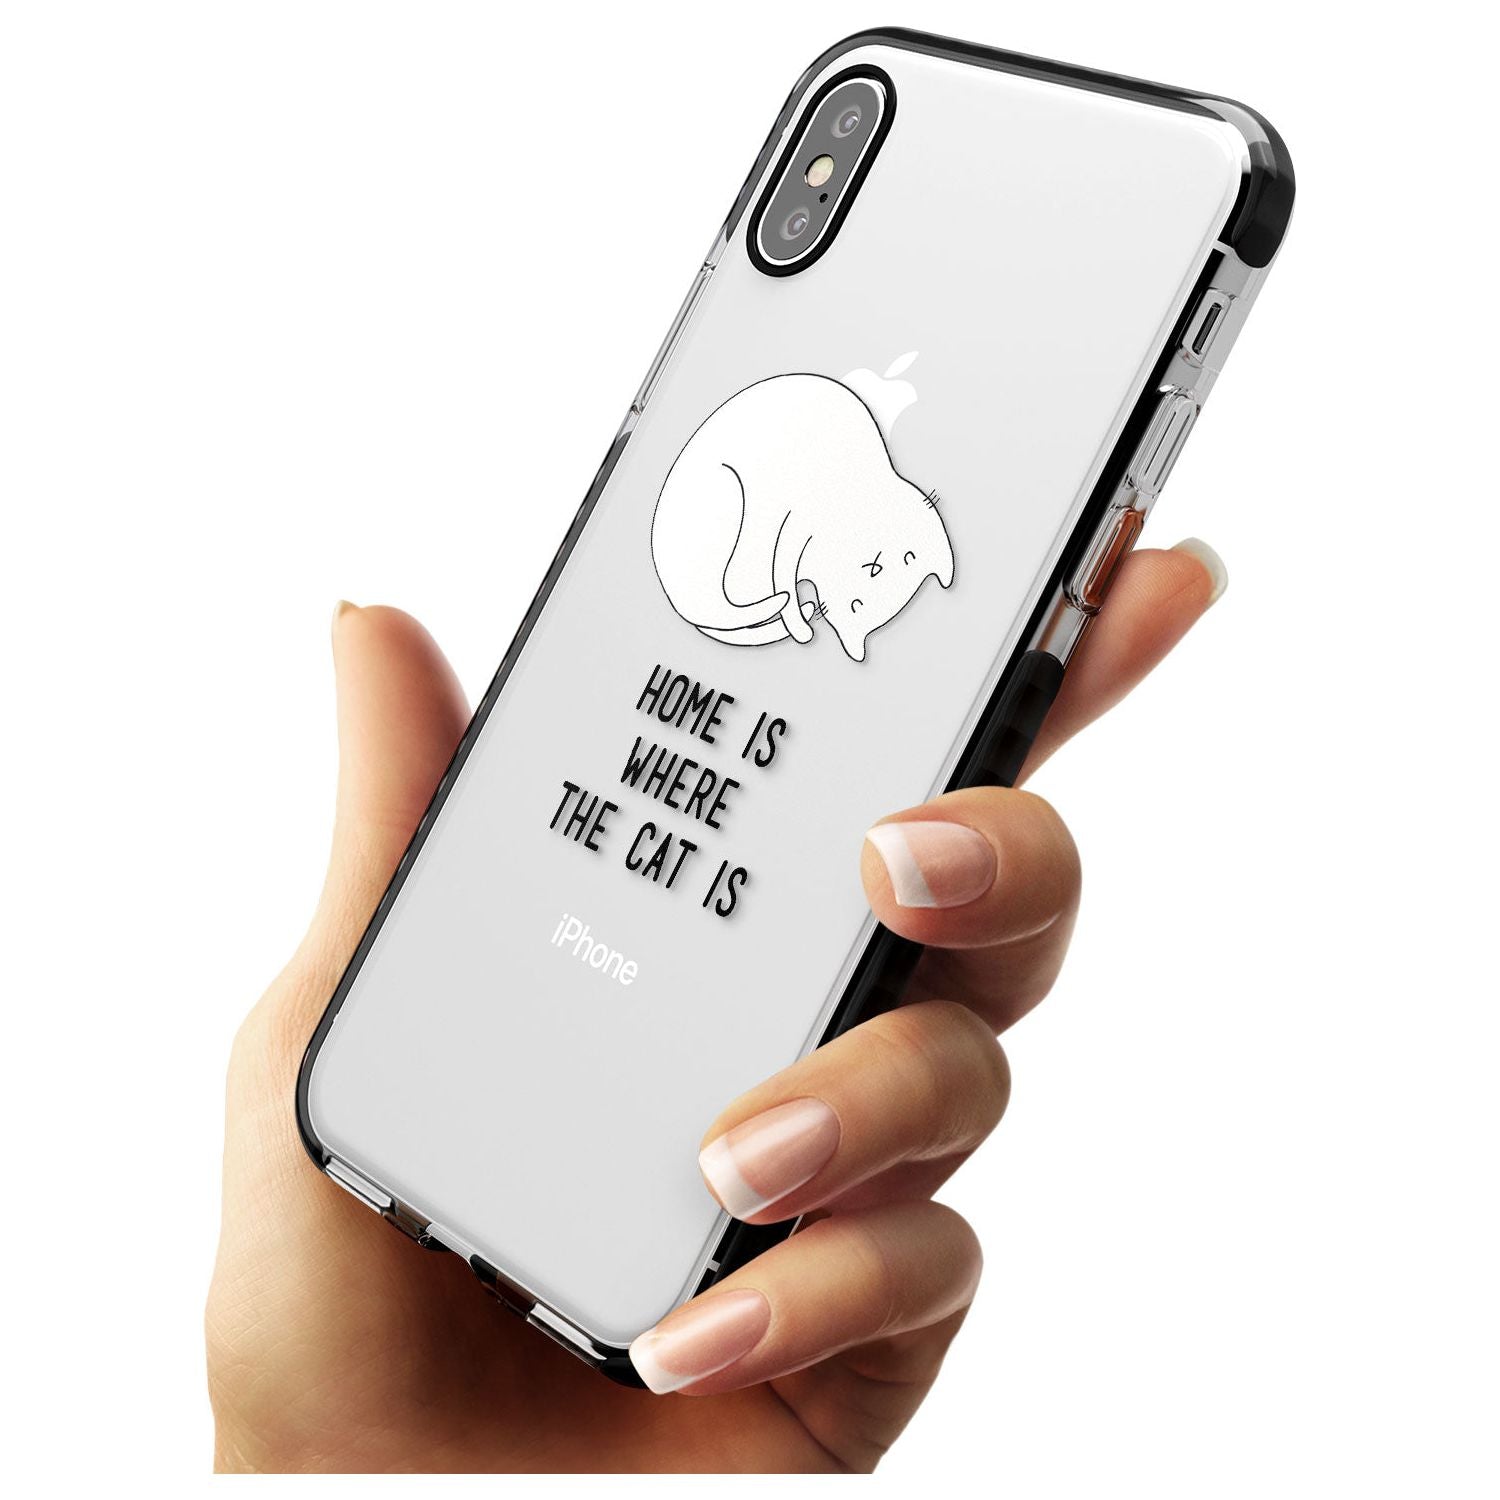 Home Is Where the Cat is Pink Fade Impact Phone Case for iPhone X XS Max XR